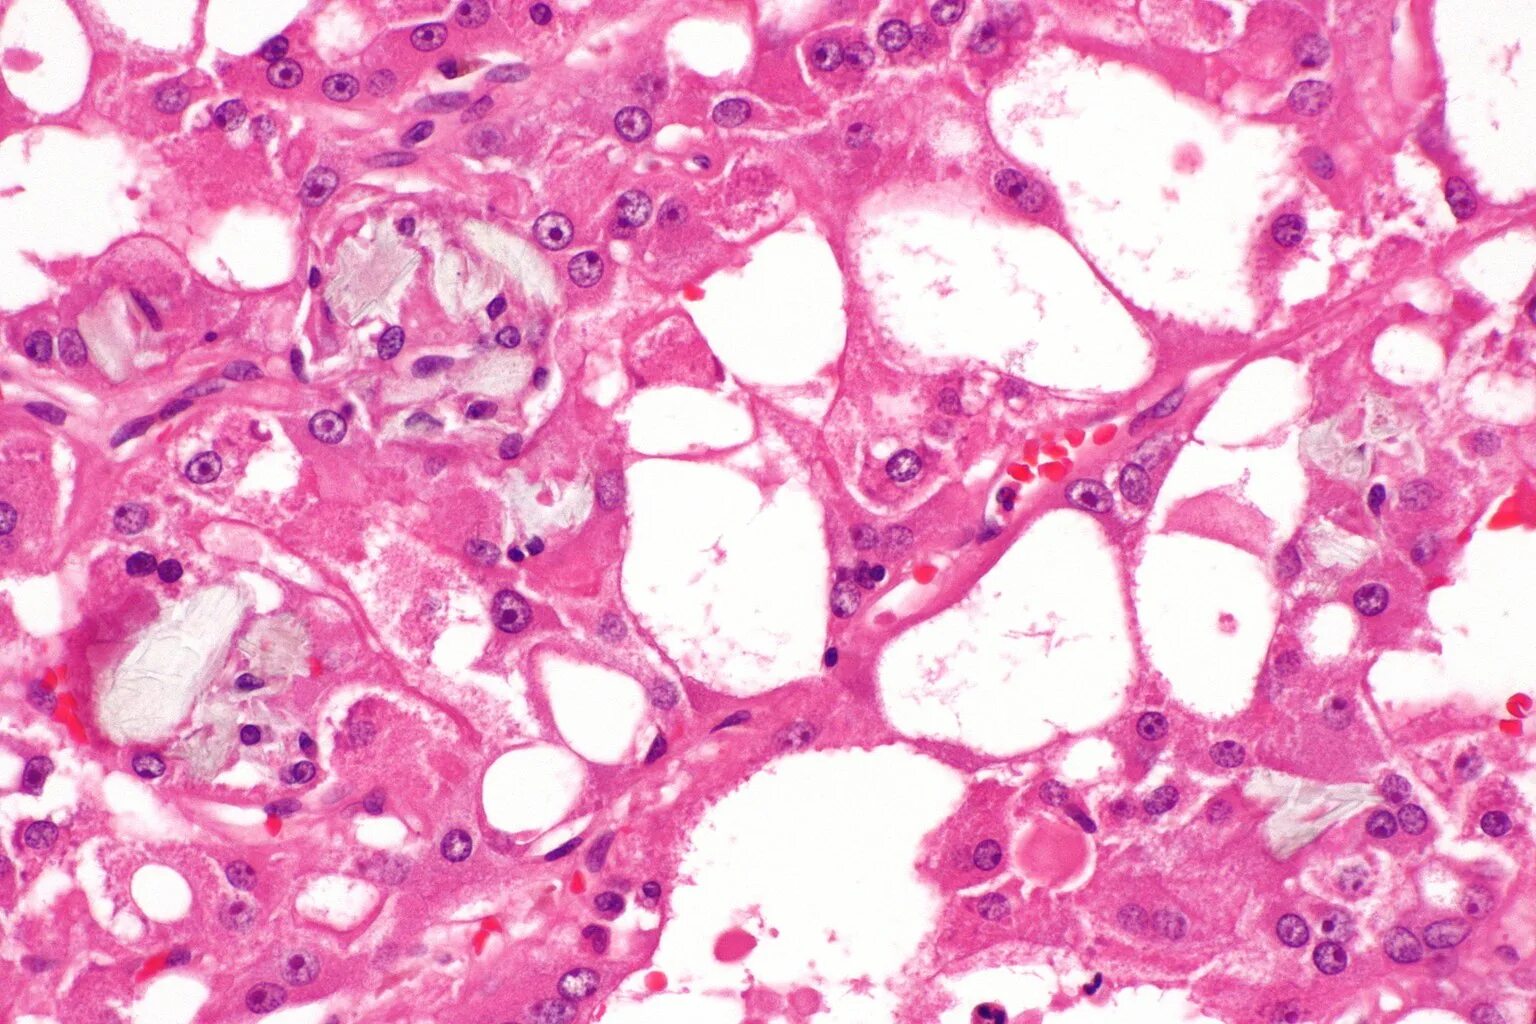 Франк renal Cell carcinoma. Cear Cell carcinoma vis multilocular Cysic renal. Diseases associated